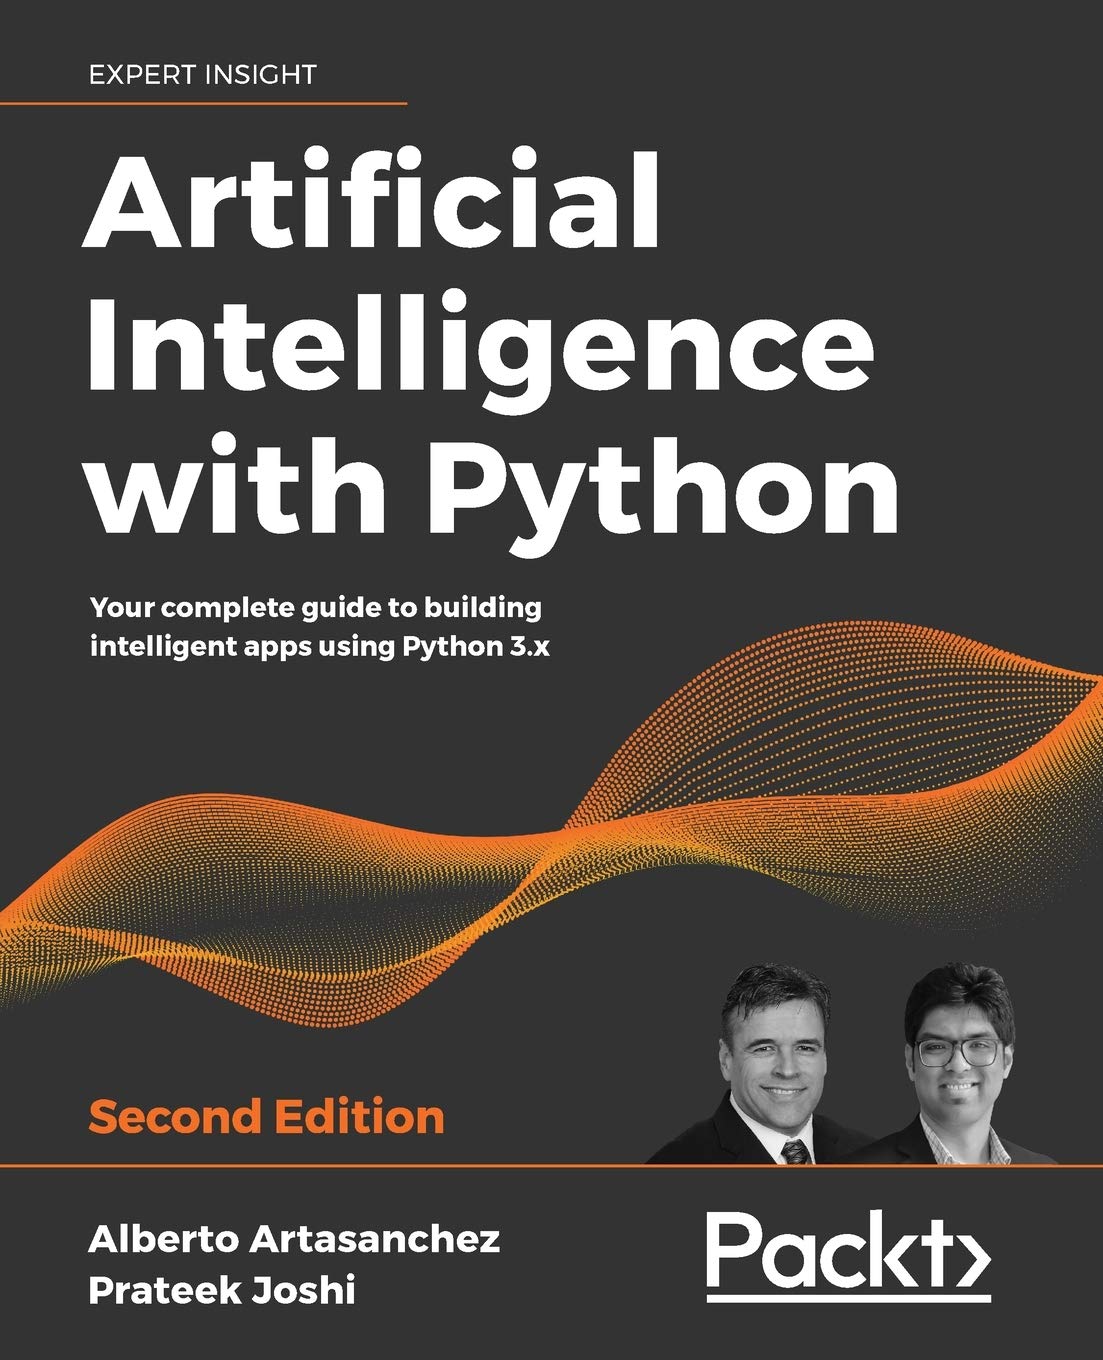 Artificial Intelligence with Python: Your complete guide to building intelligent apps using Python 3.x and TensorFlow 2, 2nd Edition